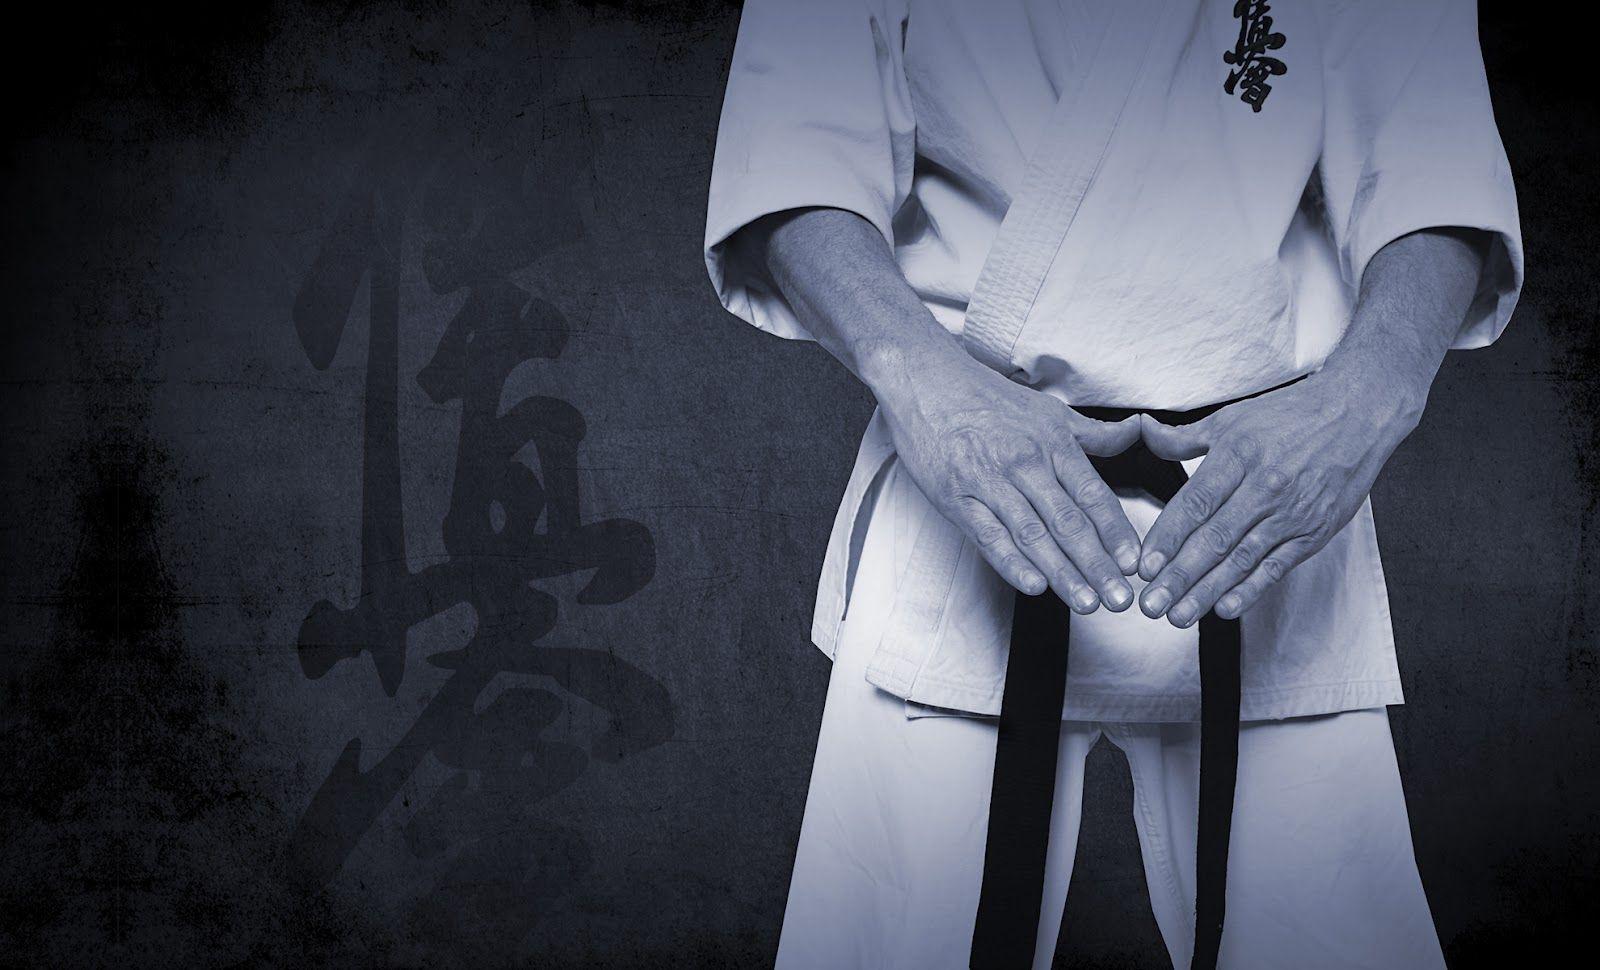 Full HDQ Karate Picture and Wallpaper Showcase